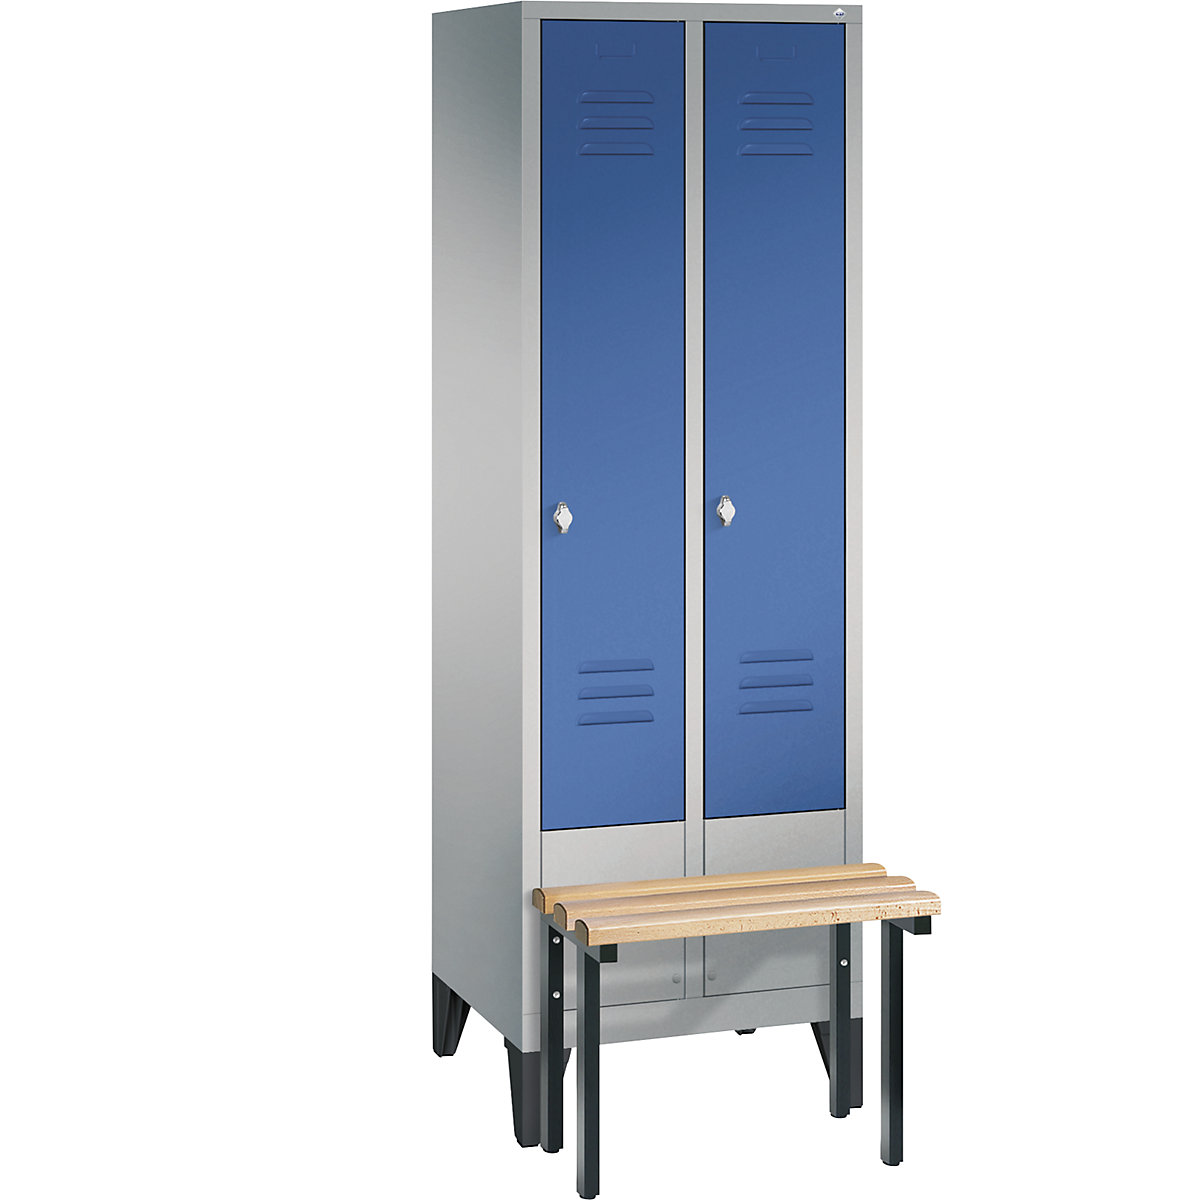 CLASSIC cloakroom locker with bench mounted in front – C+P, 2 compartments, compartment width 300 mm, white aluminium / gentian blue-12